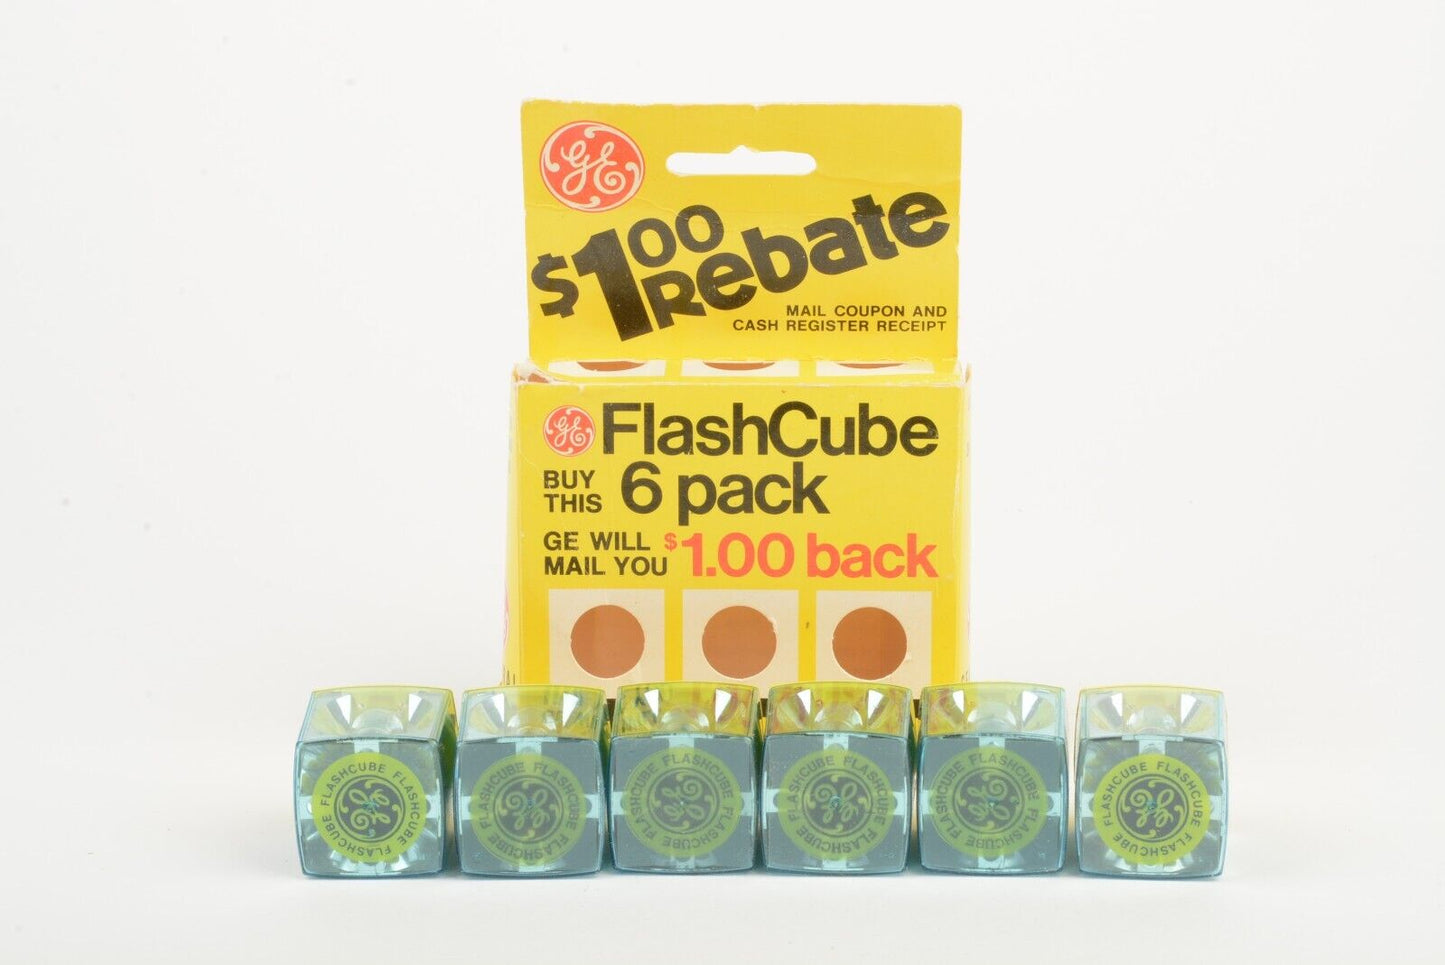 6X GE FLASH CUBES (TOTAL 24 FLASHES)